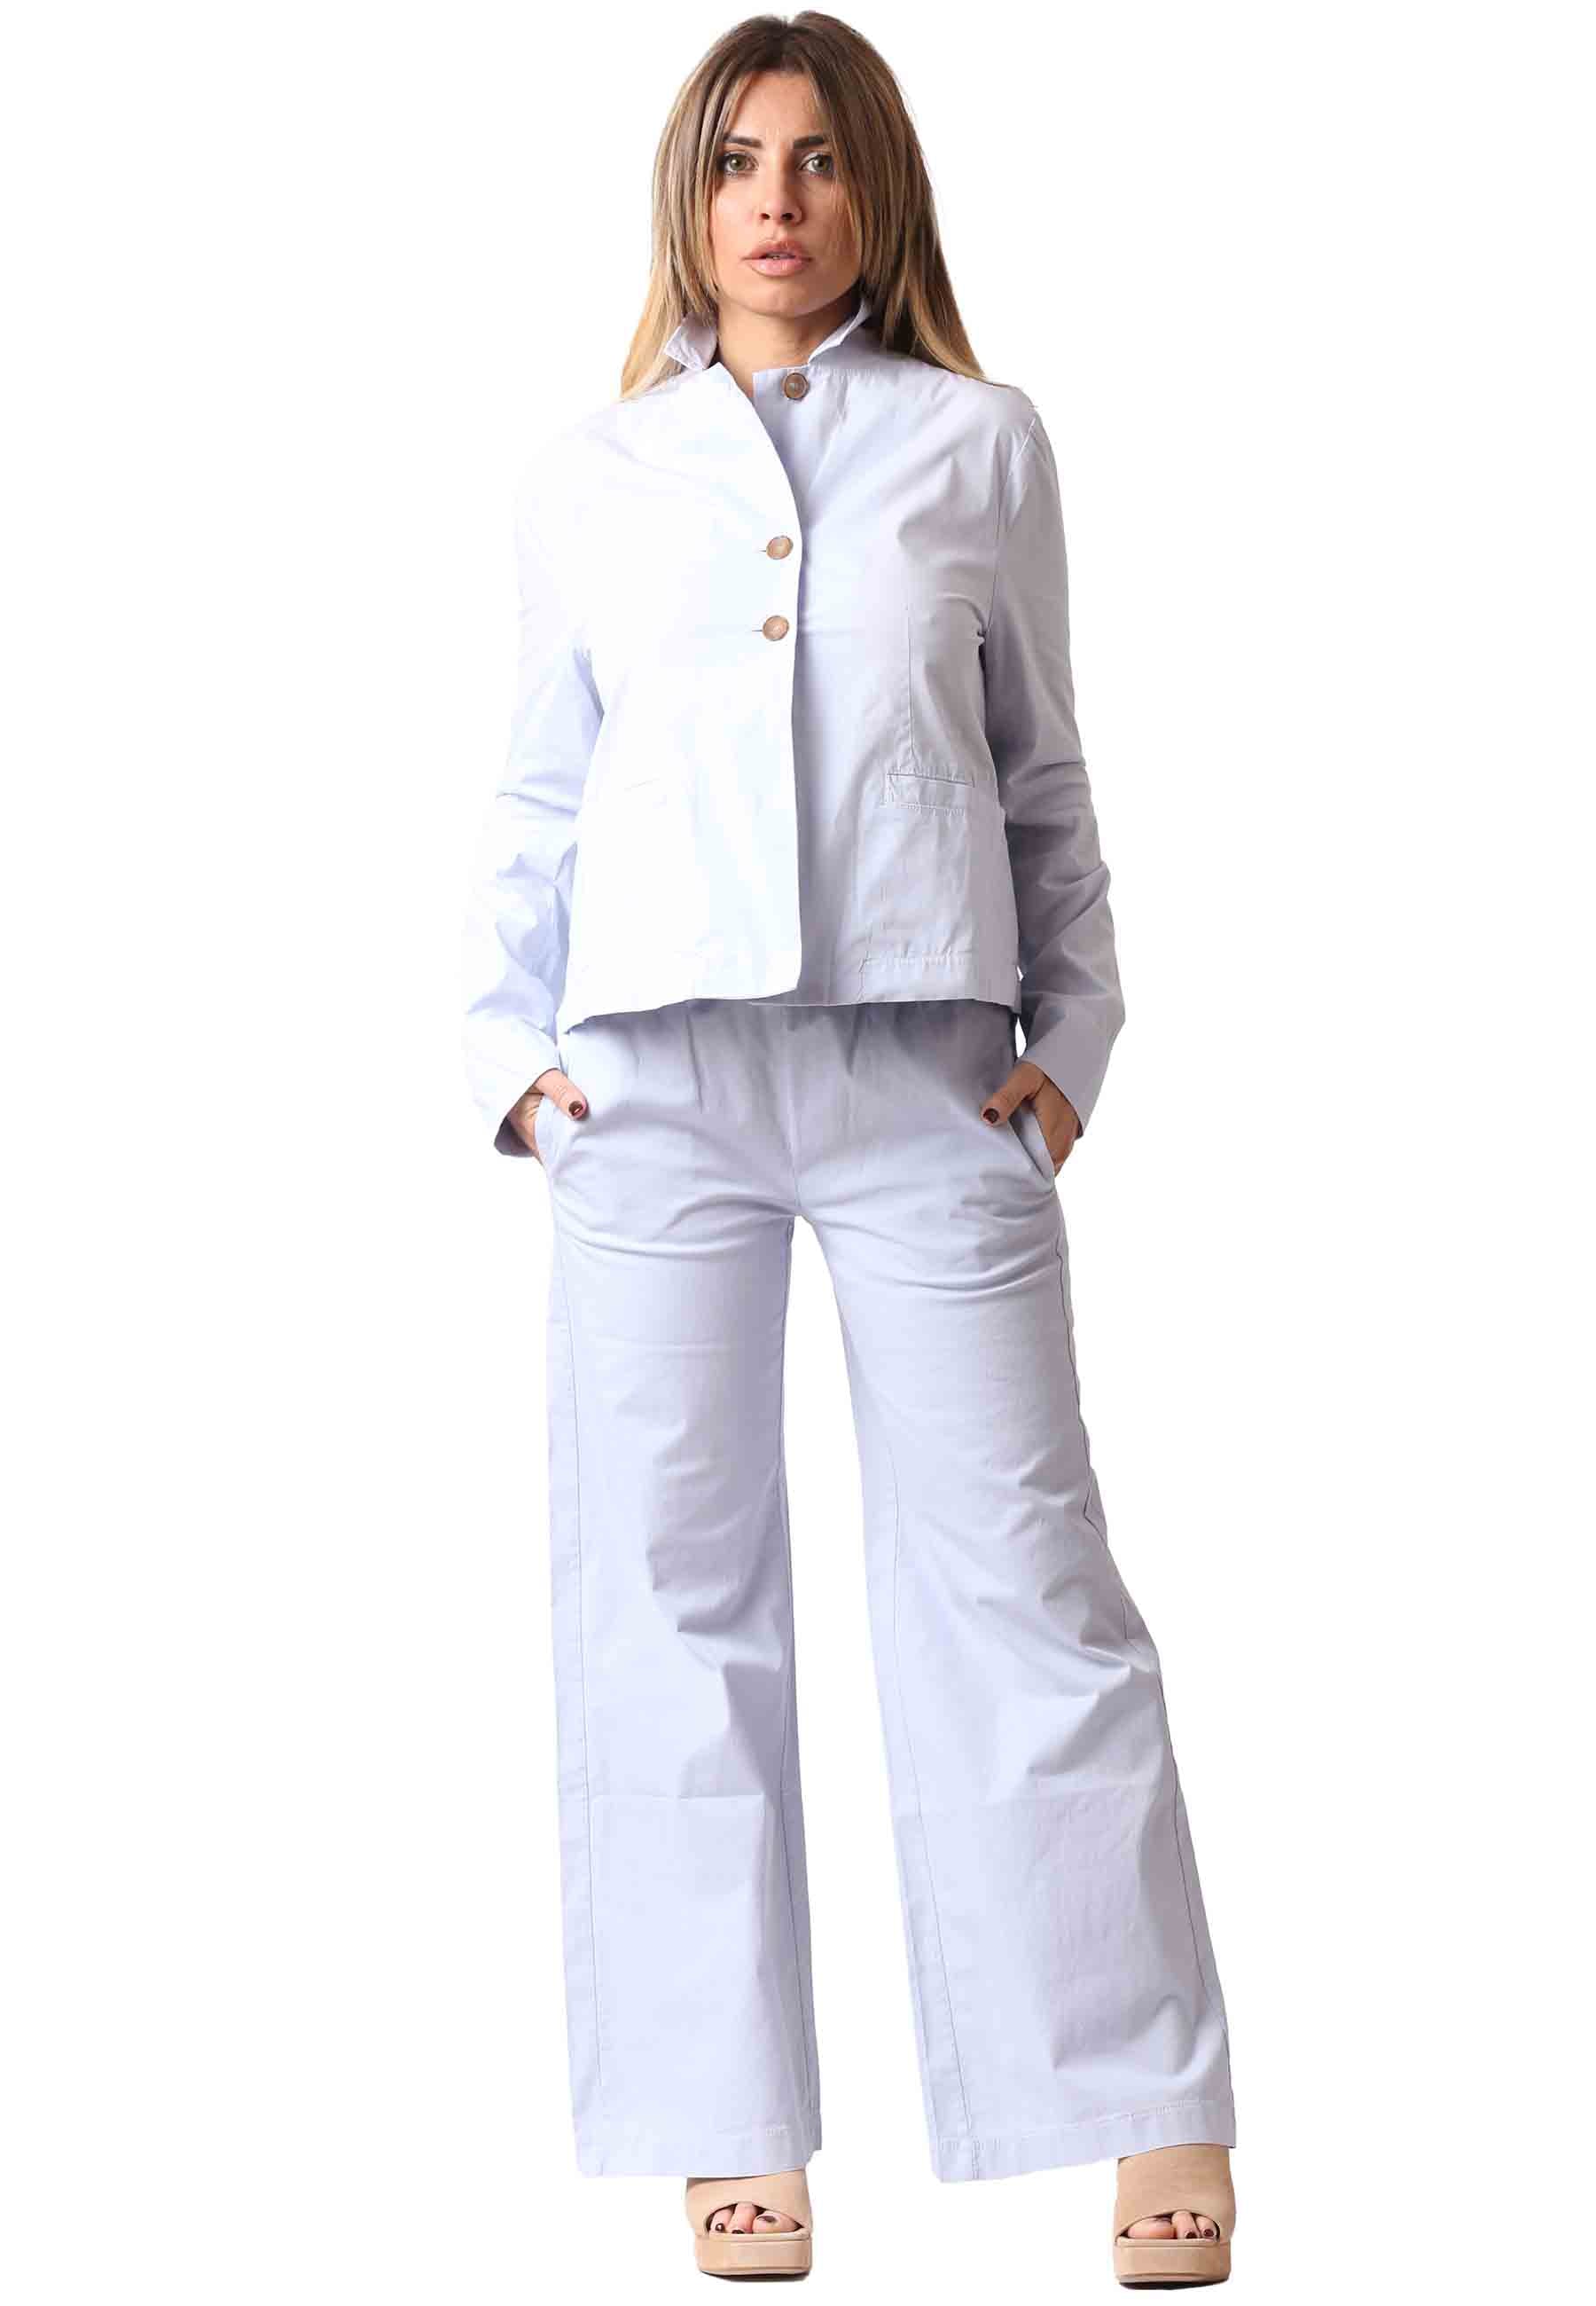 Palma women's trousers in light blue cotton with elastic waist